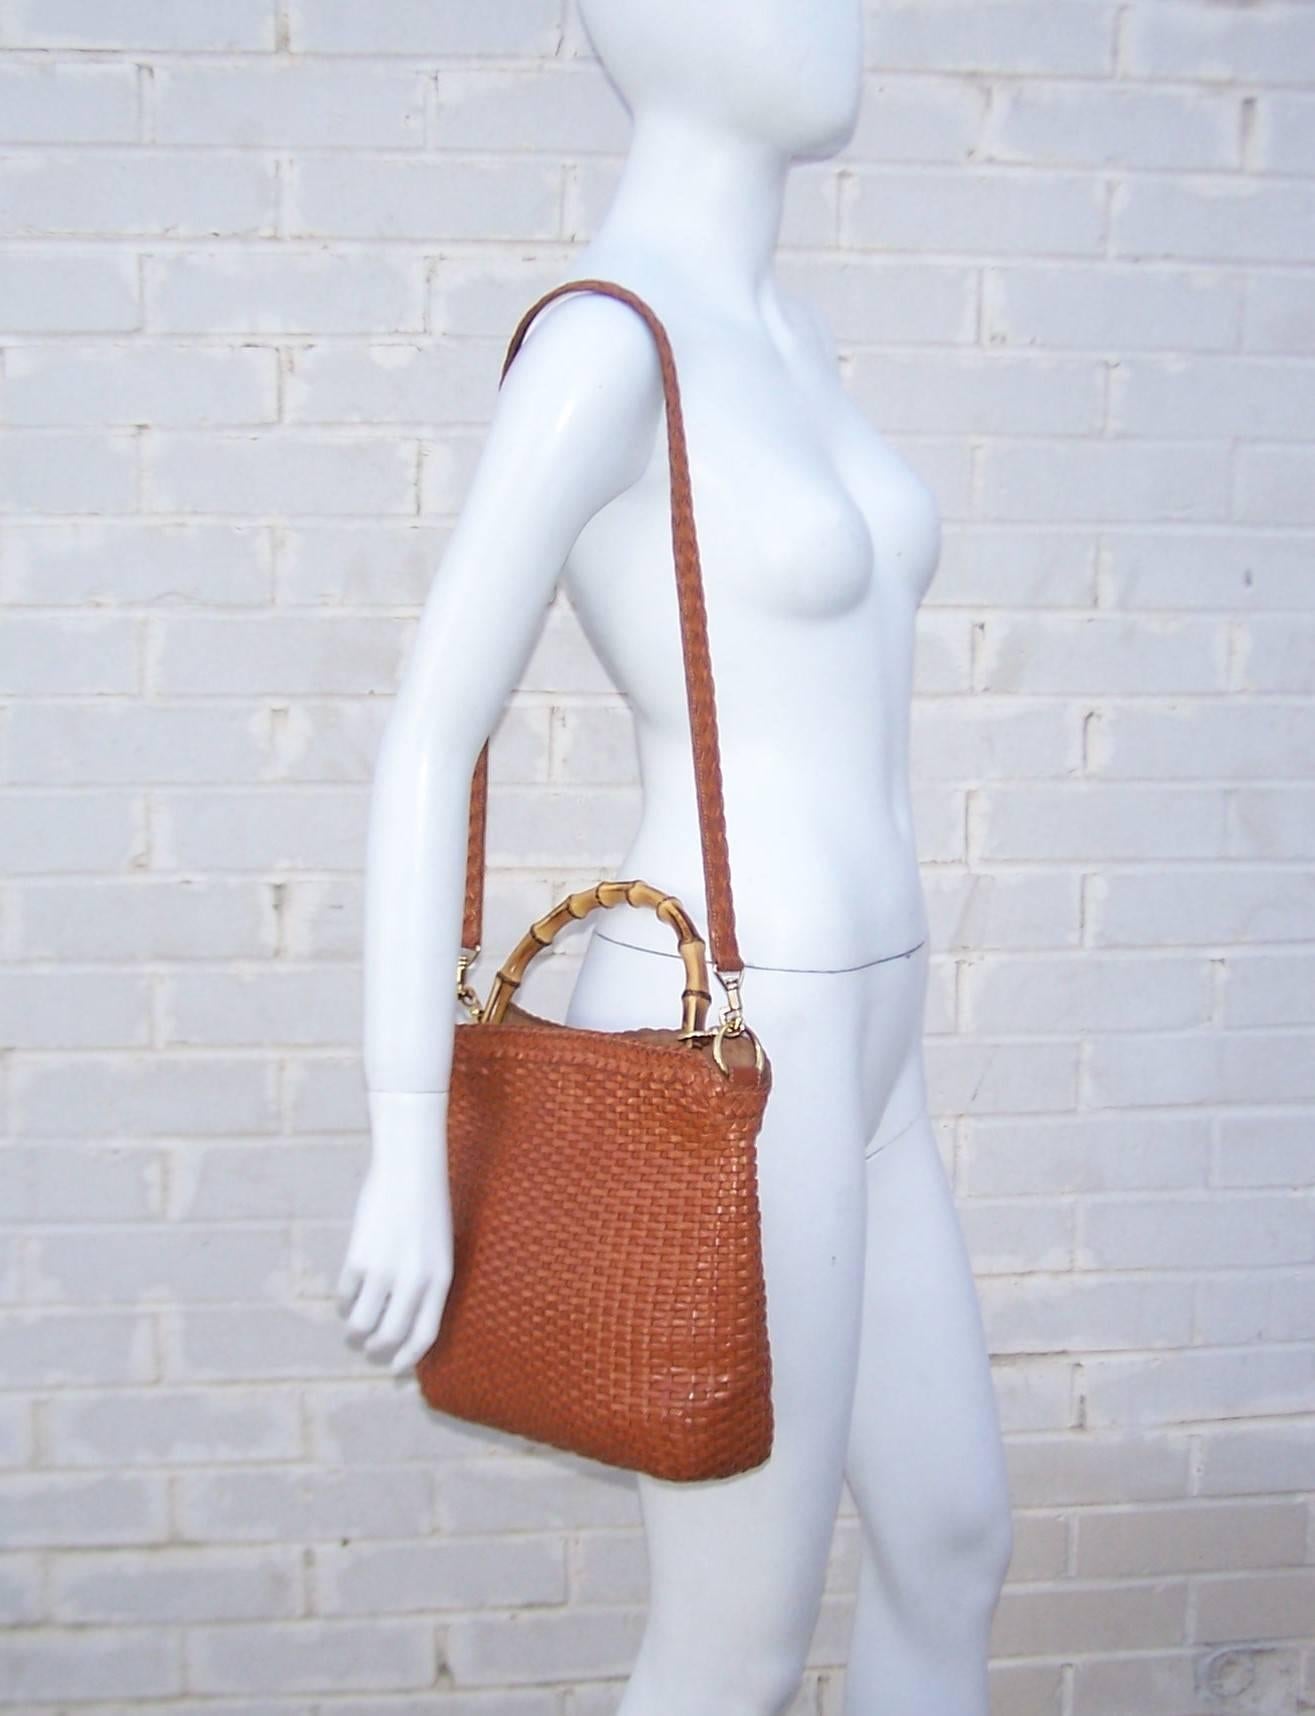 This versatile 'go to' handbag from Gucci has classic bells and whistles with a modern approach to functionality.  The cognac leather body is woven into a casual design which promises to age beautifully while the iconic Gucci bamboo top handle is a